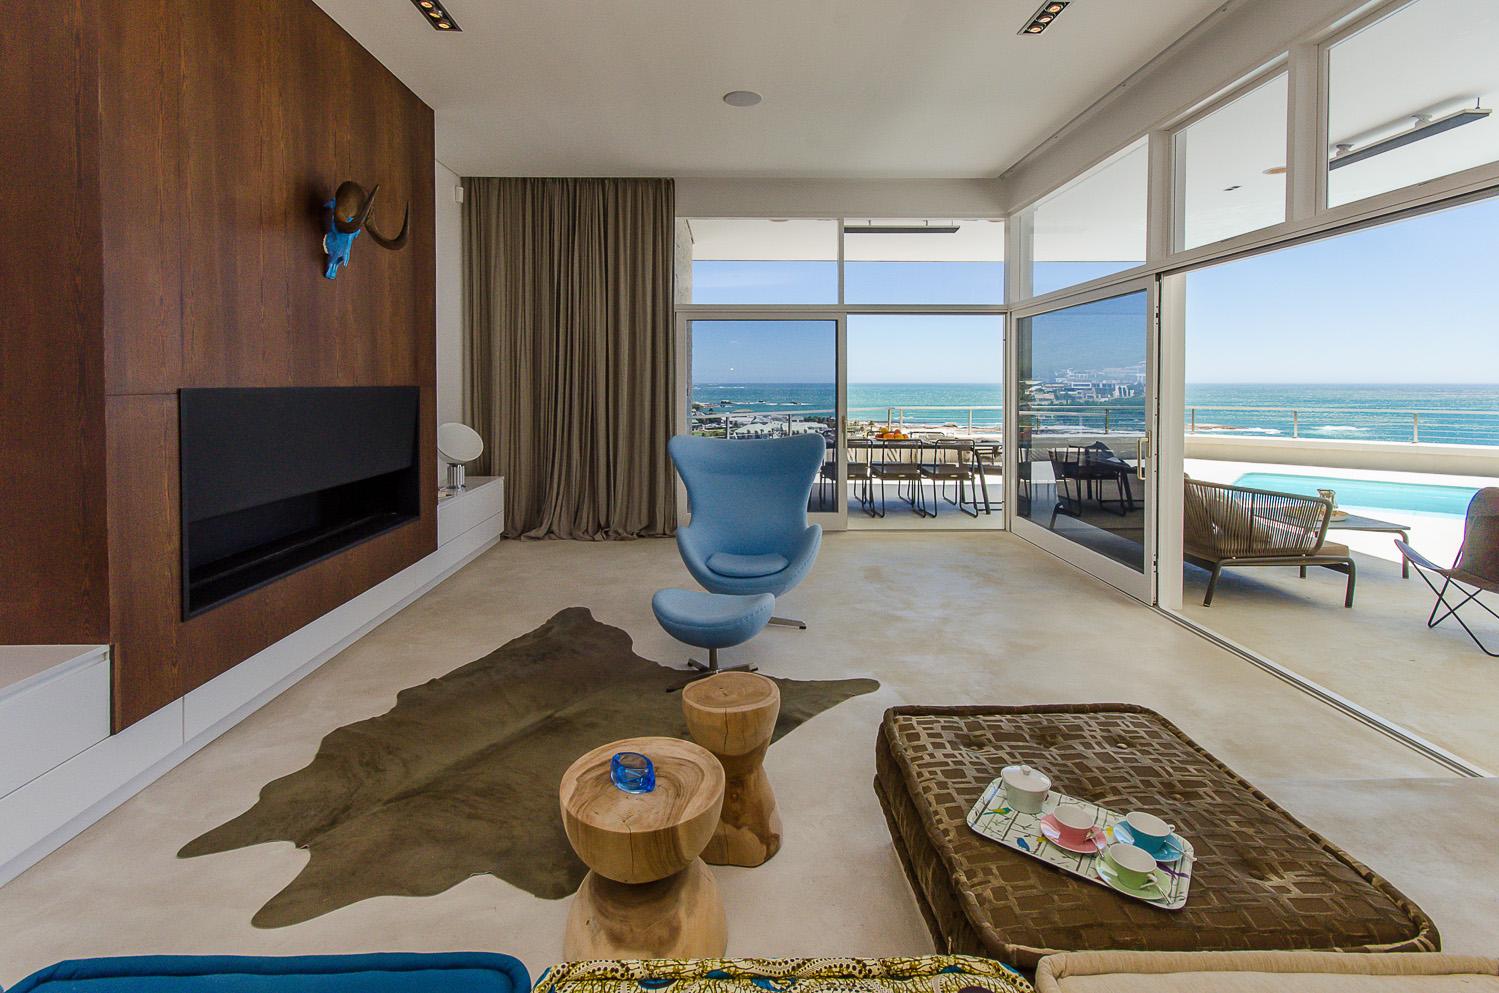 Photo 14 of Strathmore Dream accommodation in Camps Bay, Cape Town with 4 bedrooms and 3 bathrooms